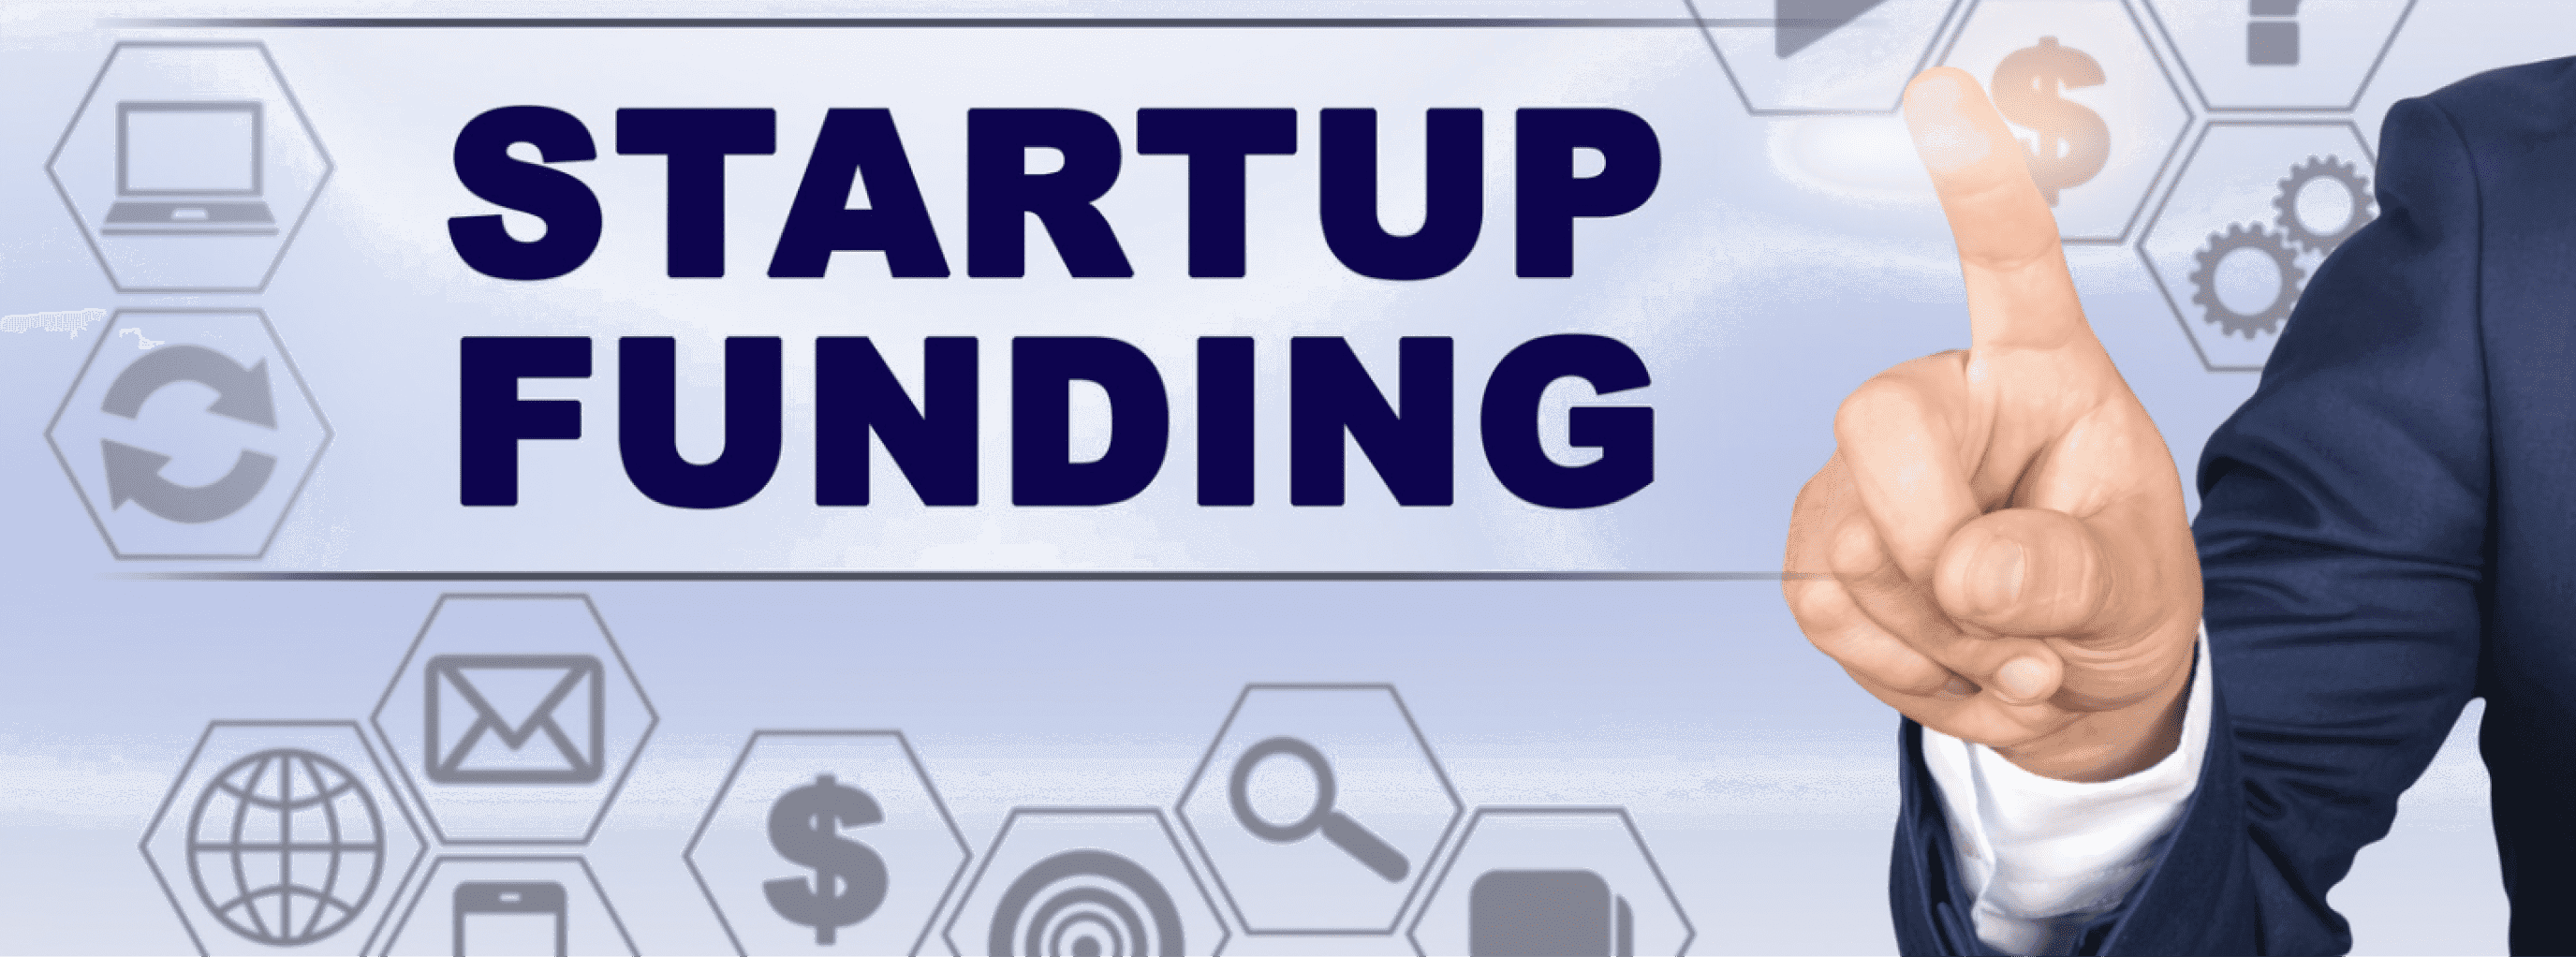 How to get funding for a startup image